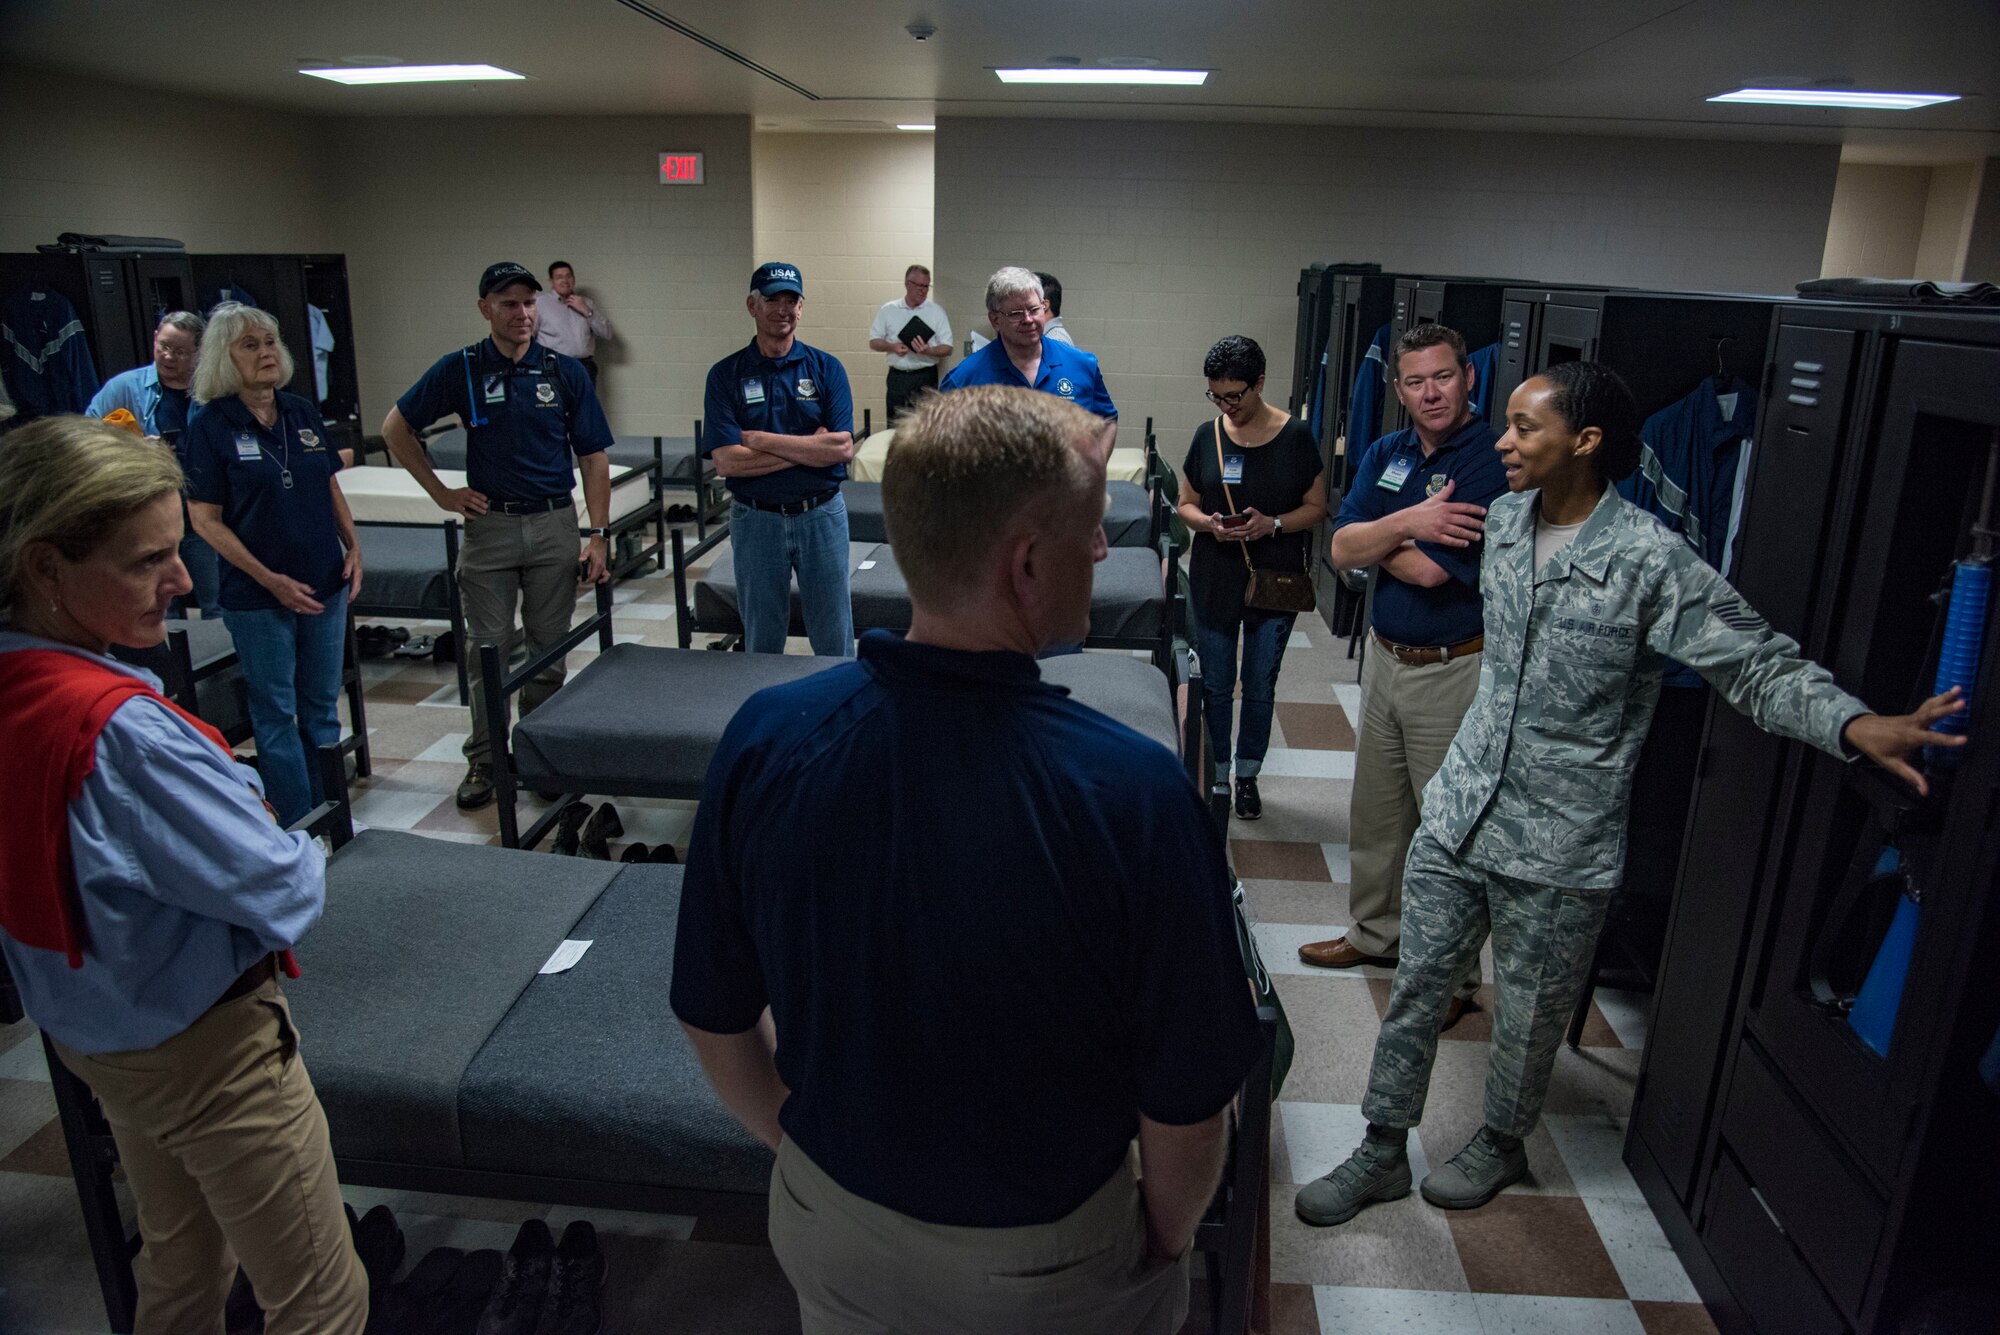 Air Mobility Command civic leaders observe the dormitories of basic training, Joint Base San Antonio-Lackland, Texas, May 2, 2019.  The civic leaders toured the 37th Training Wing, also known as the “Gateway Wing,” as guests of AMC Cmmander Gen. Maryanne Miller. (U.S. Air Force photo by Traci Howells)